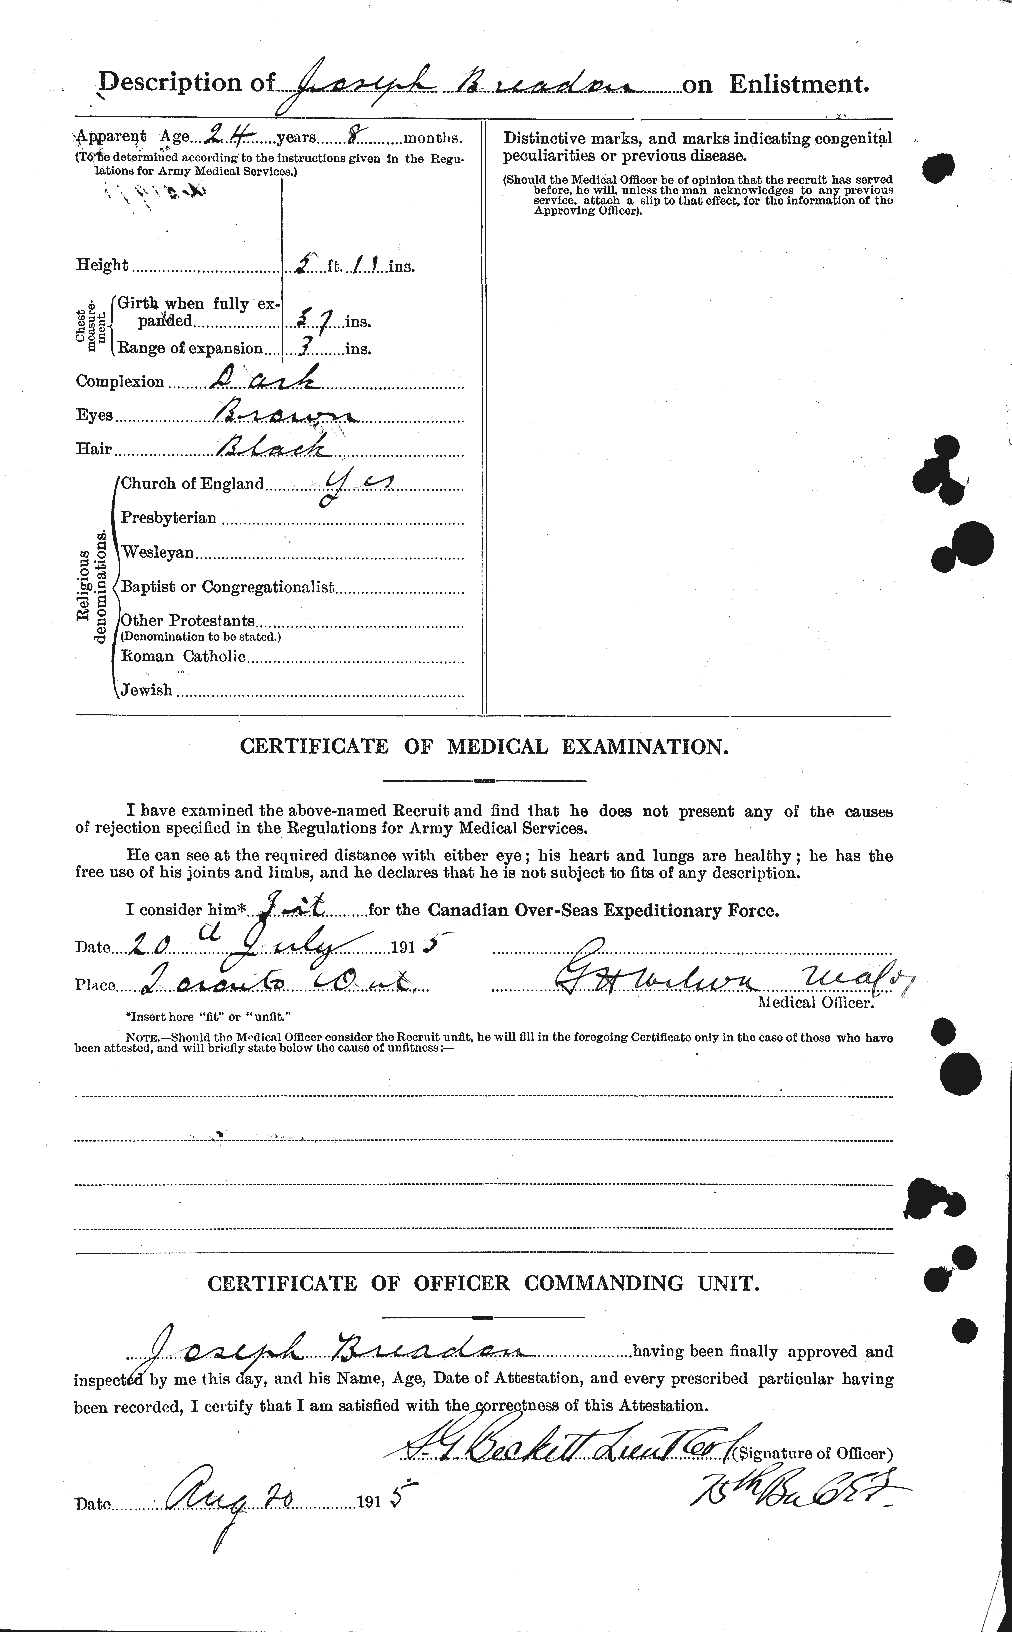 Personnel Records of the First World War - CEF 262723b